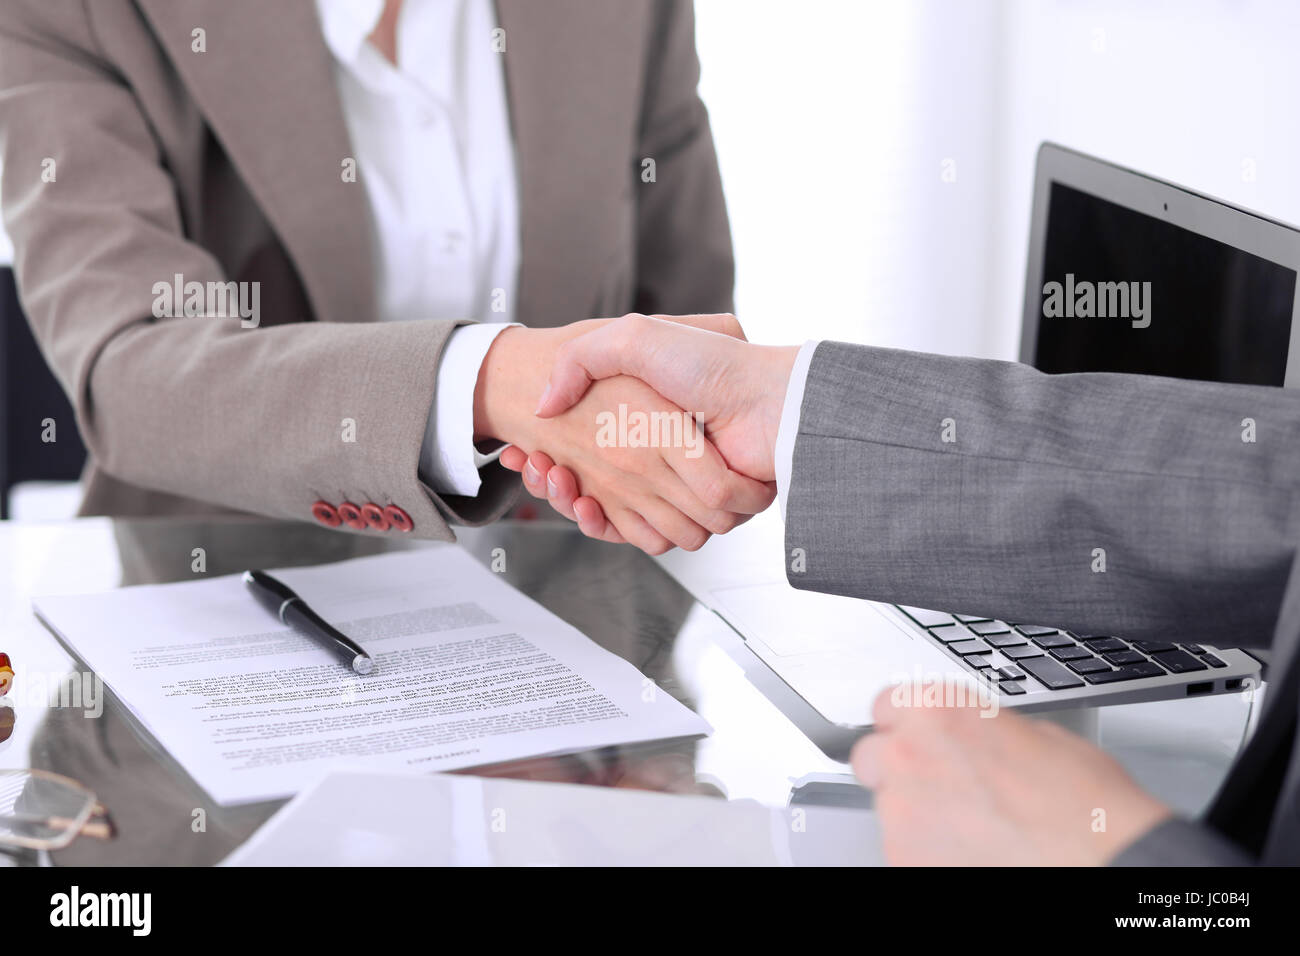 Business handshake. Two women lawyers are shaking hands after meeting or  negotiation.  Stock Photo